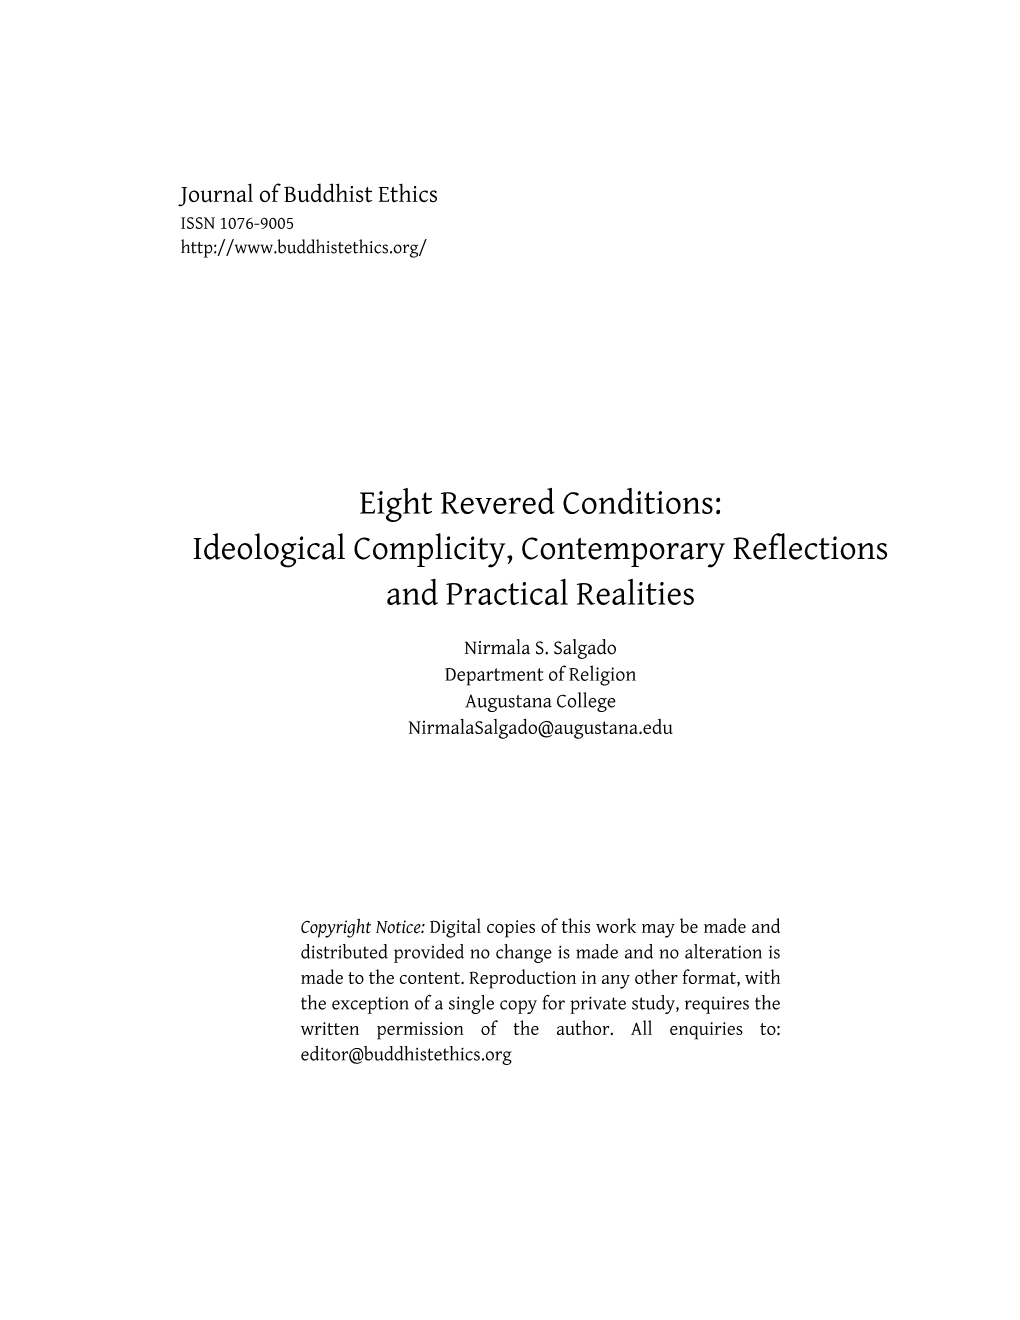 Eight Revered Conditions: Ideological Complicity, Contemporary Reflections and Practical Realities